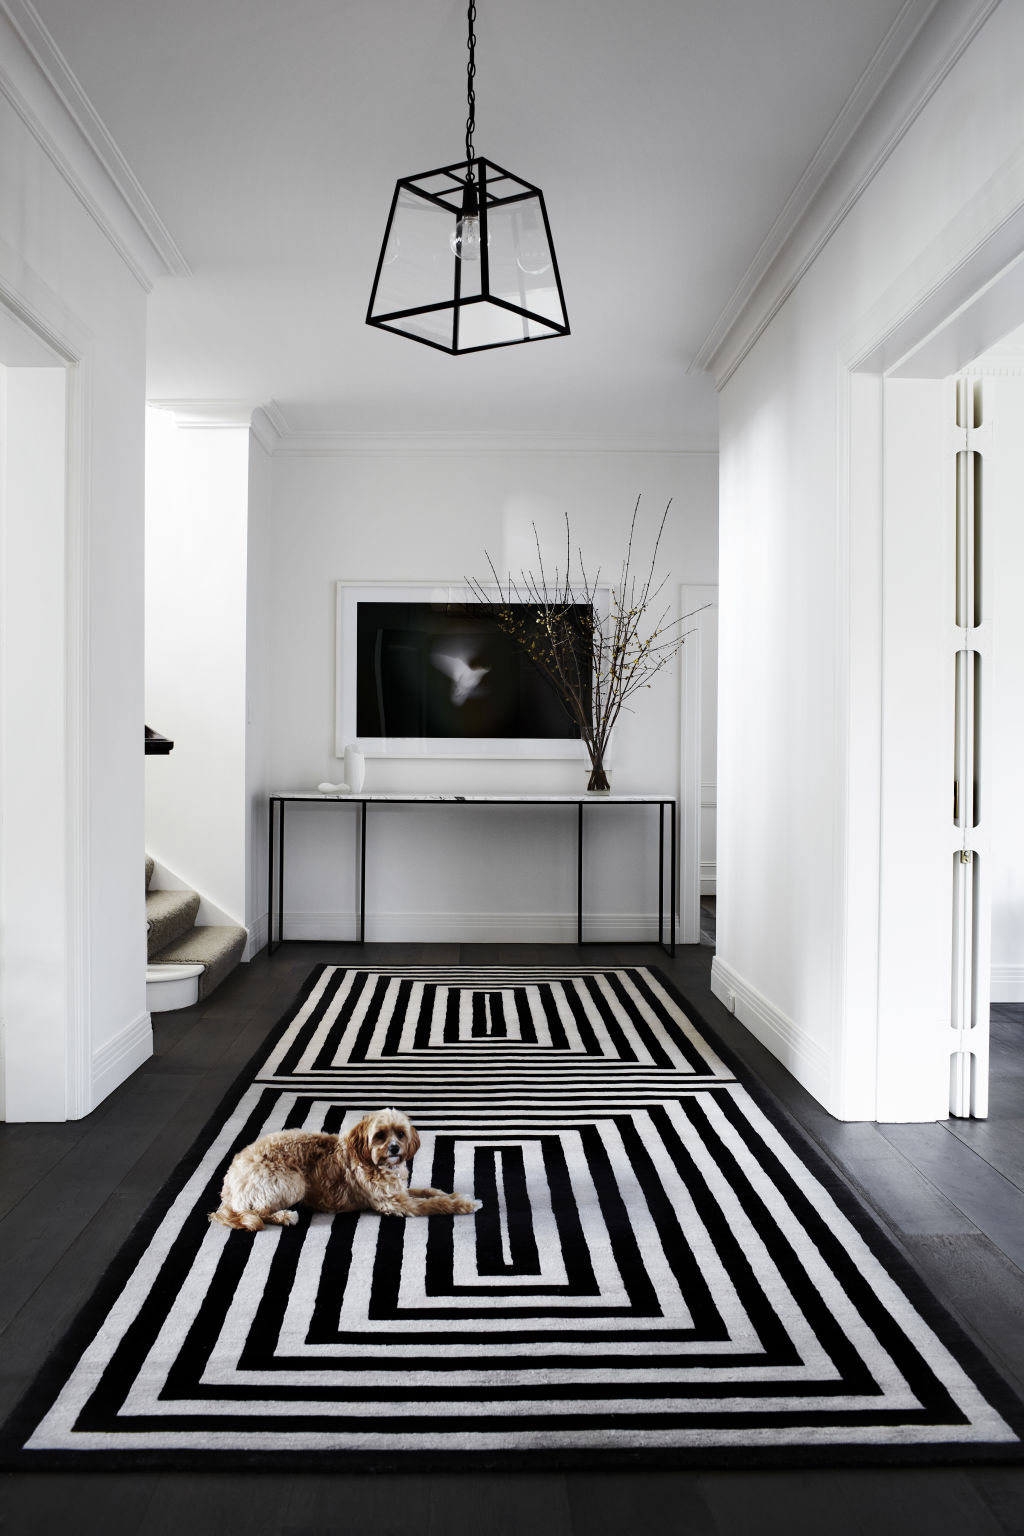 Be clear about the purpose of a room when choosing the texture of a rug. Photo: Sharyn Cairns